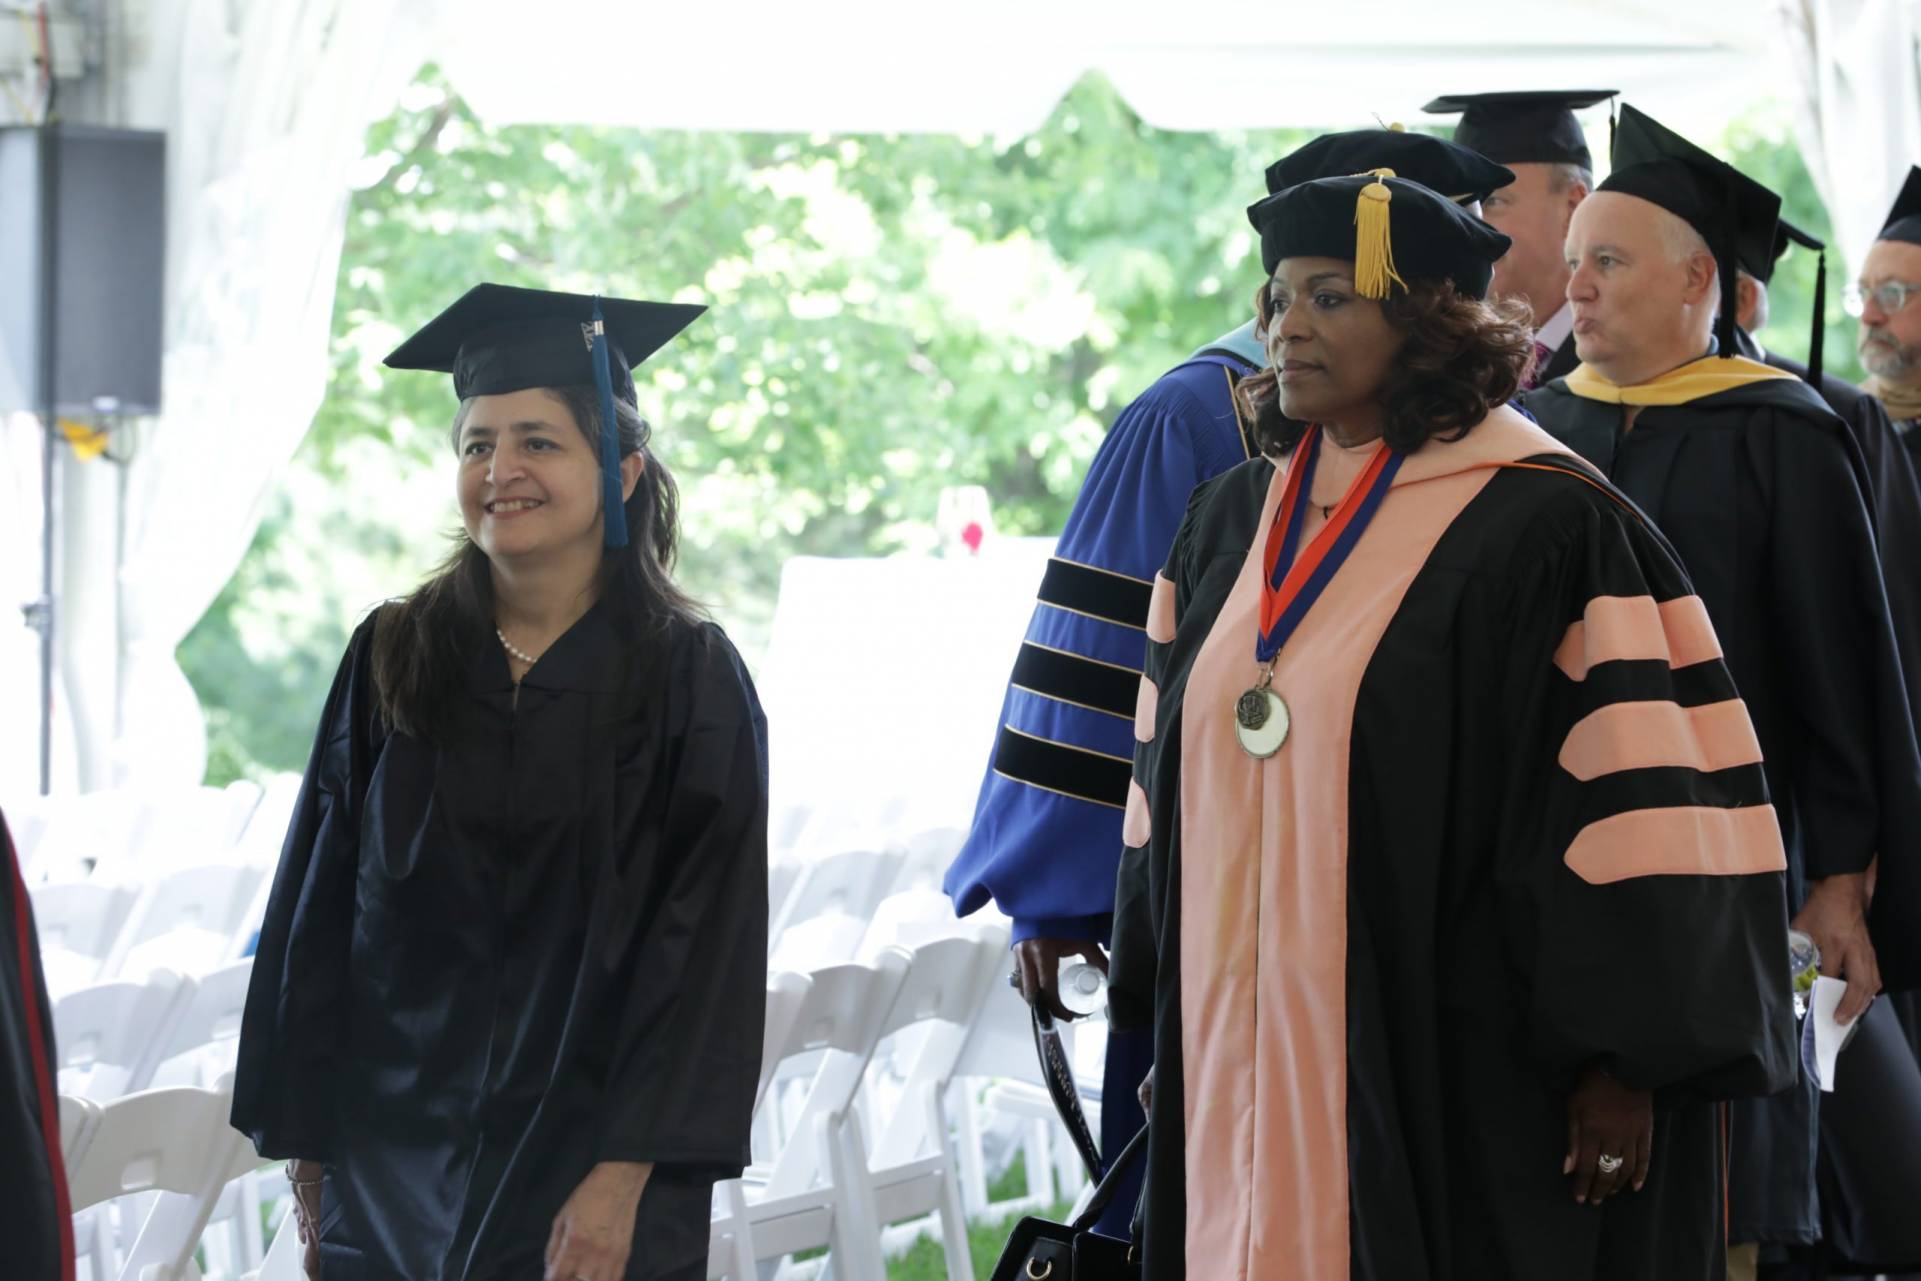 Faculty and Staff walking in the procession for the Installation of Dr. Harvey-Smith.